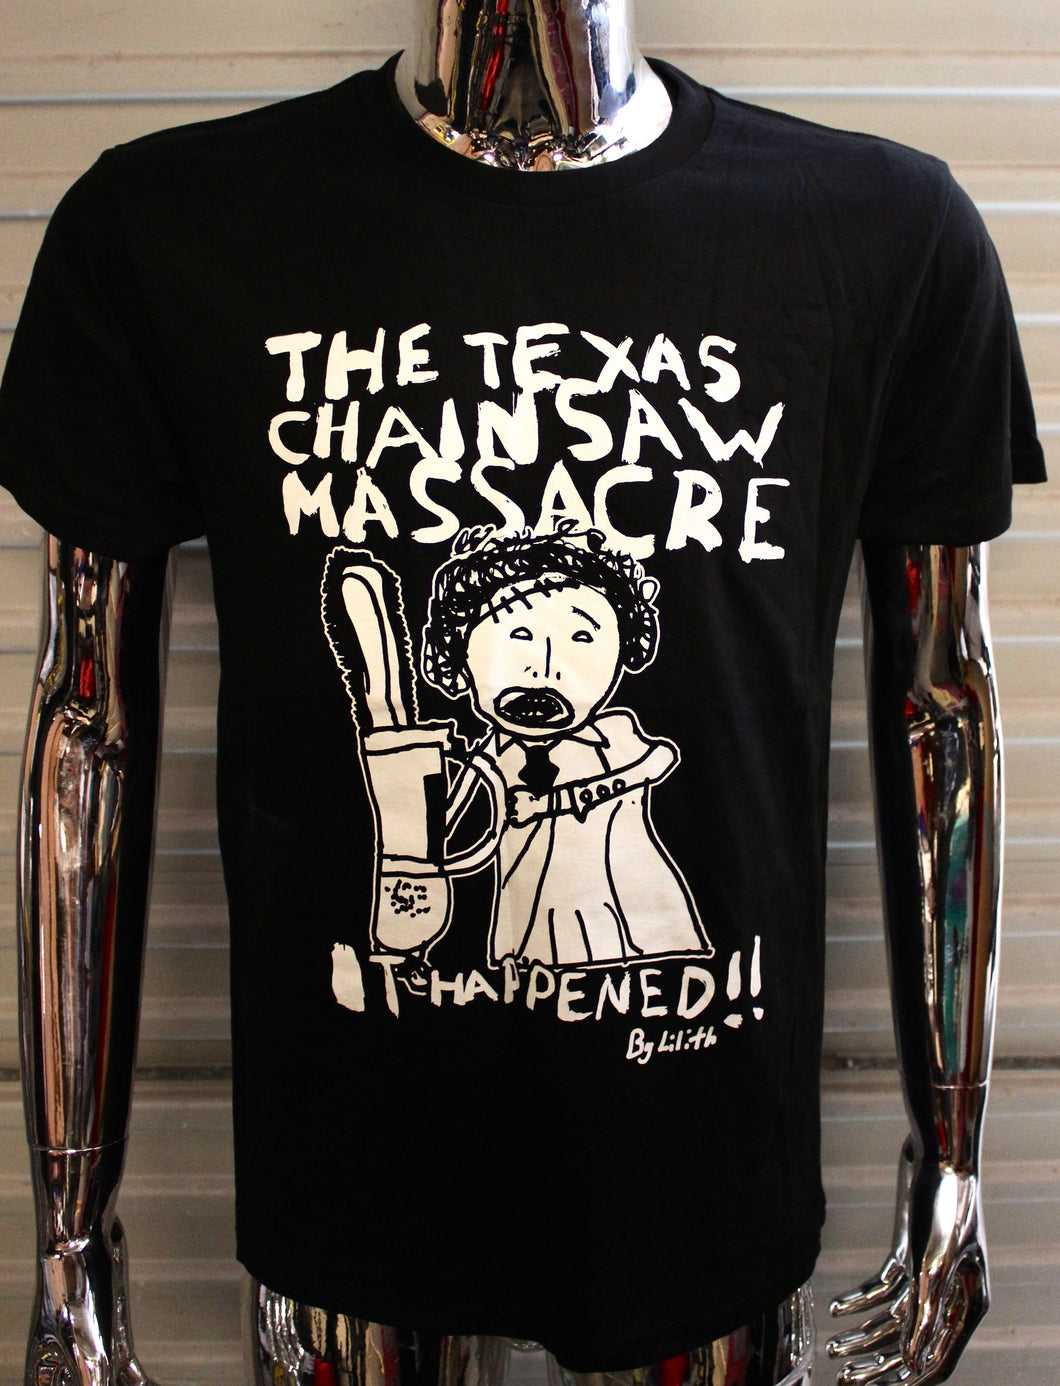 The Texas Chainsaw Massacre by Lilith T-shirt